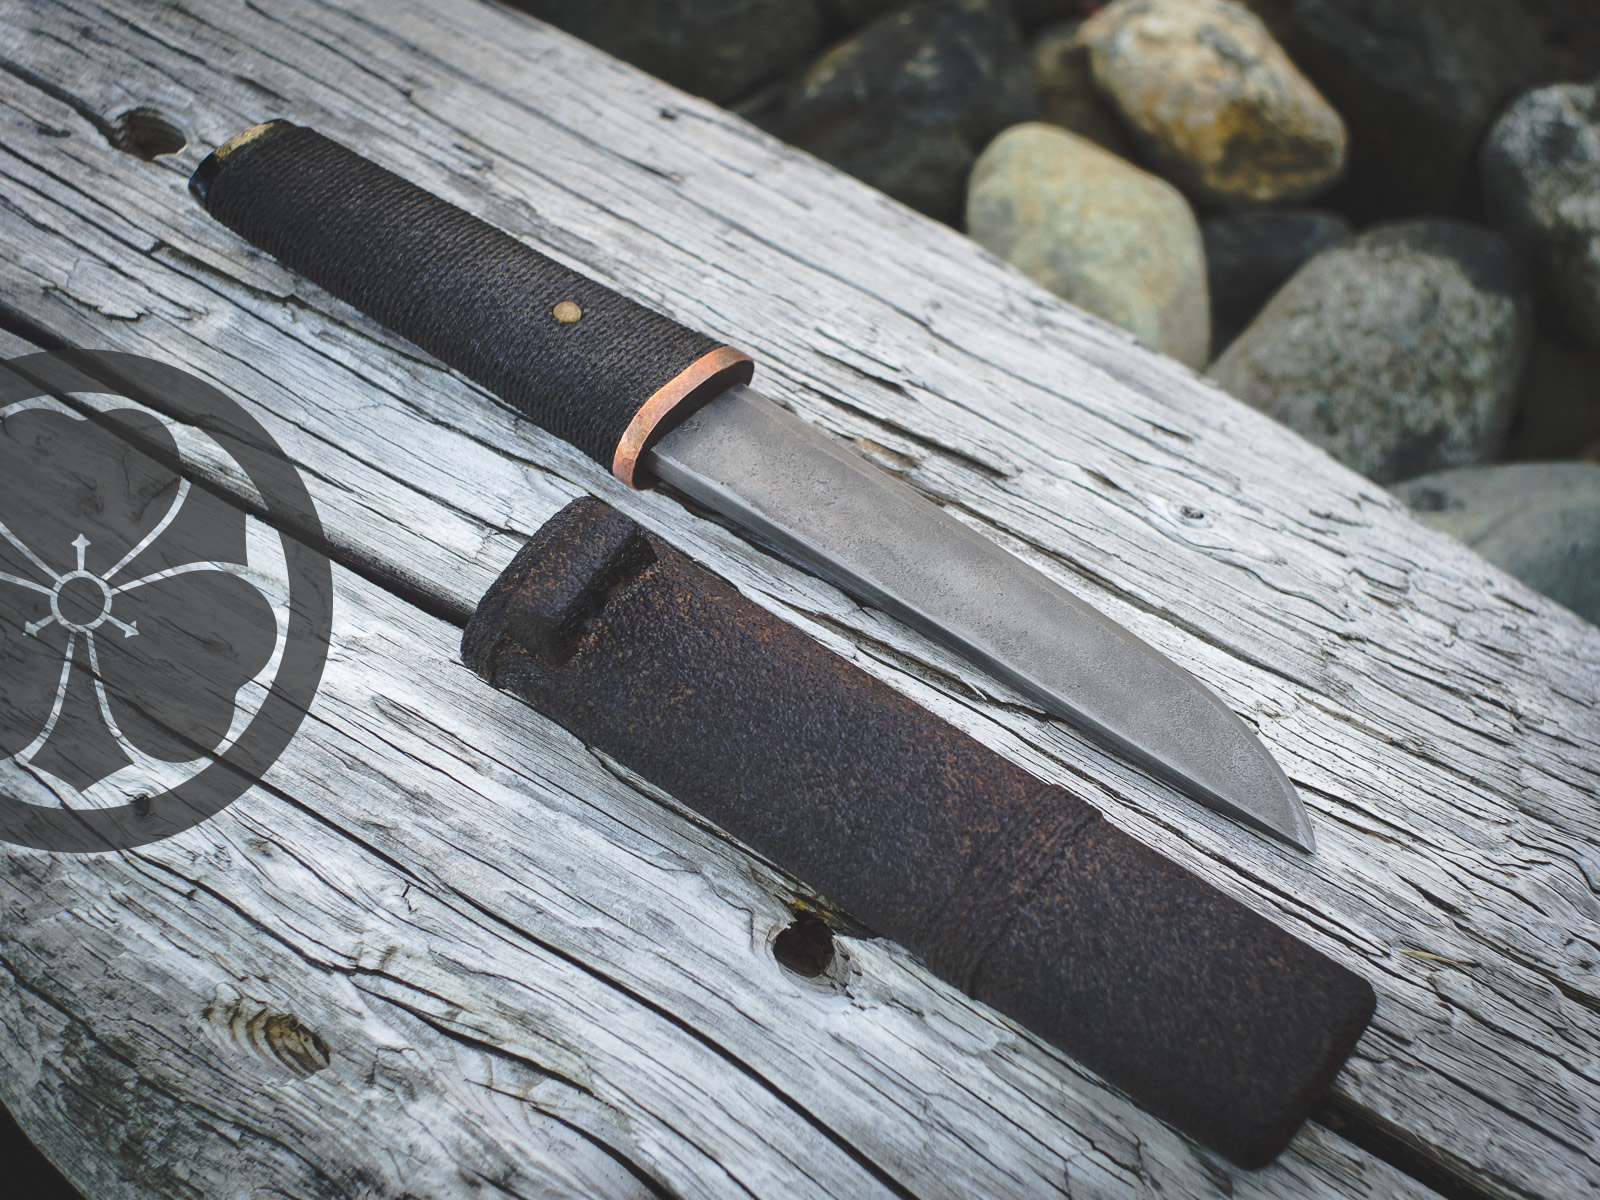 Island Blacksmith: How to care for hand forged knives made from reclaimed and natural materials